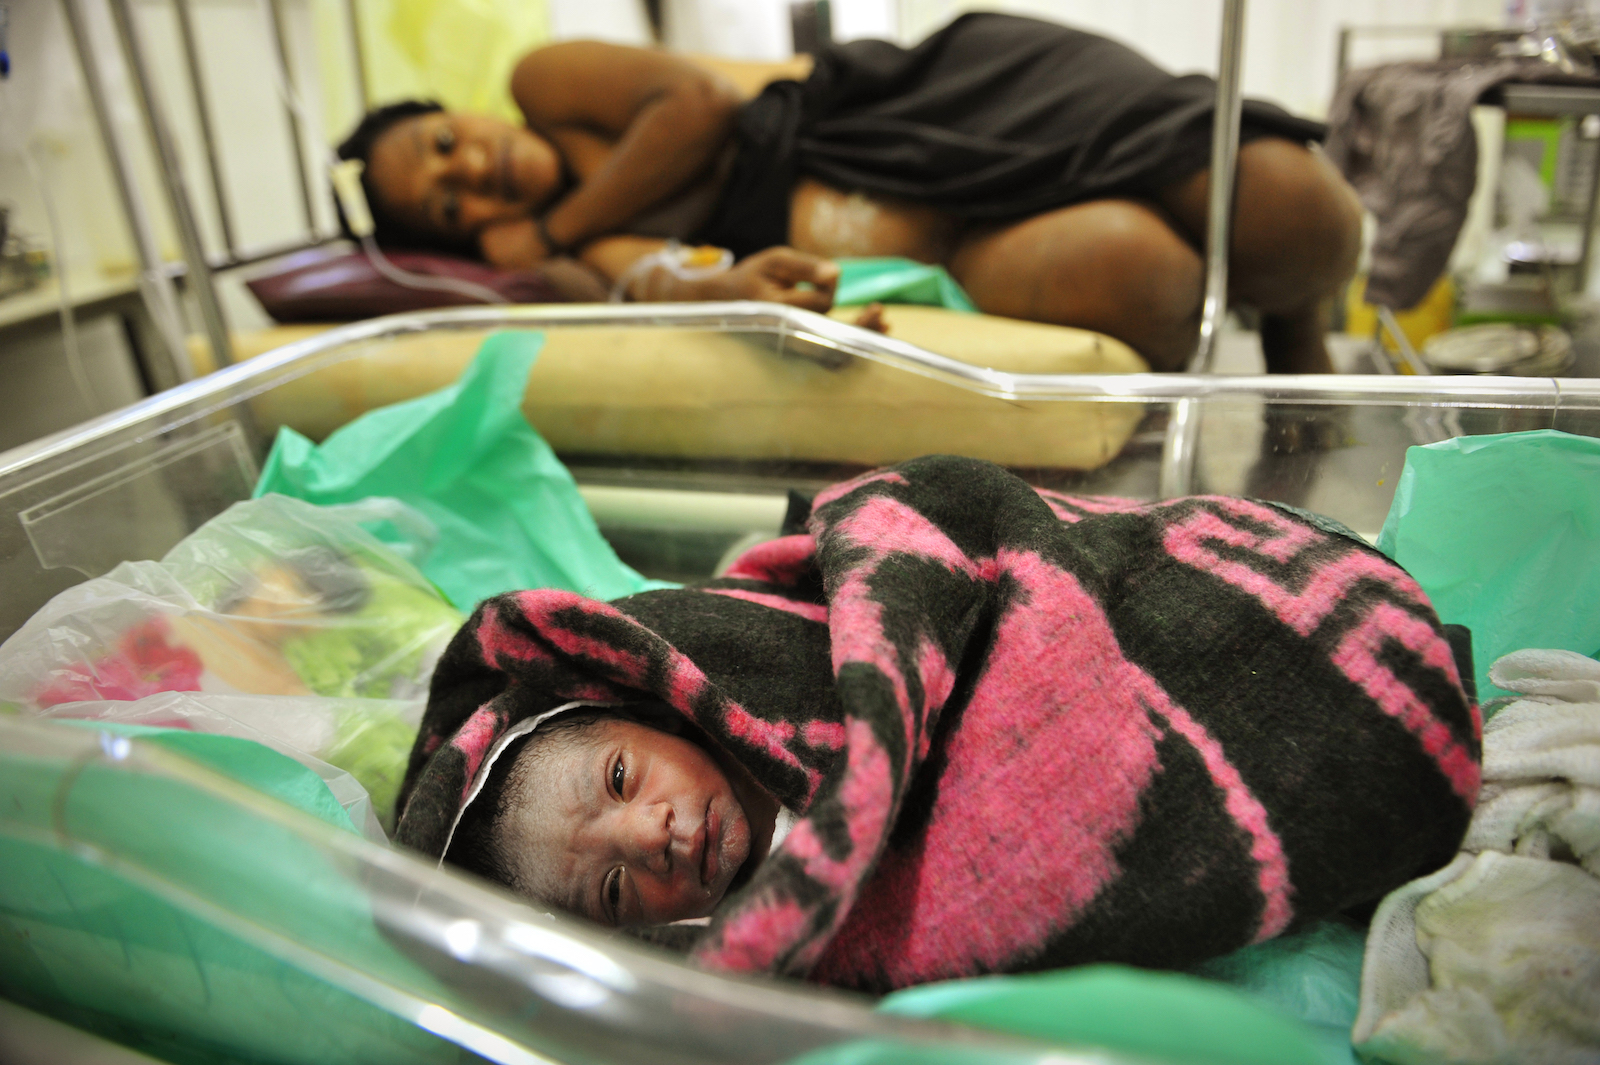 A woman in a hospital bed lays next to a swaddled newborn